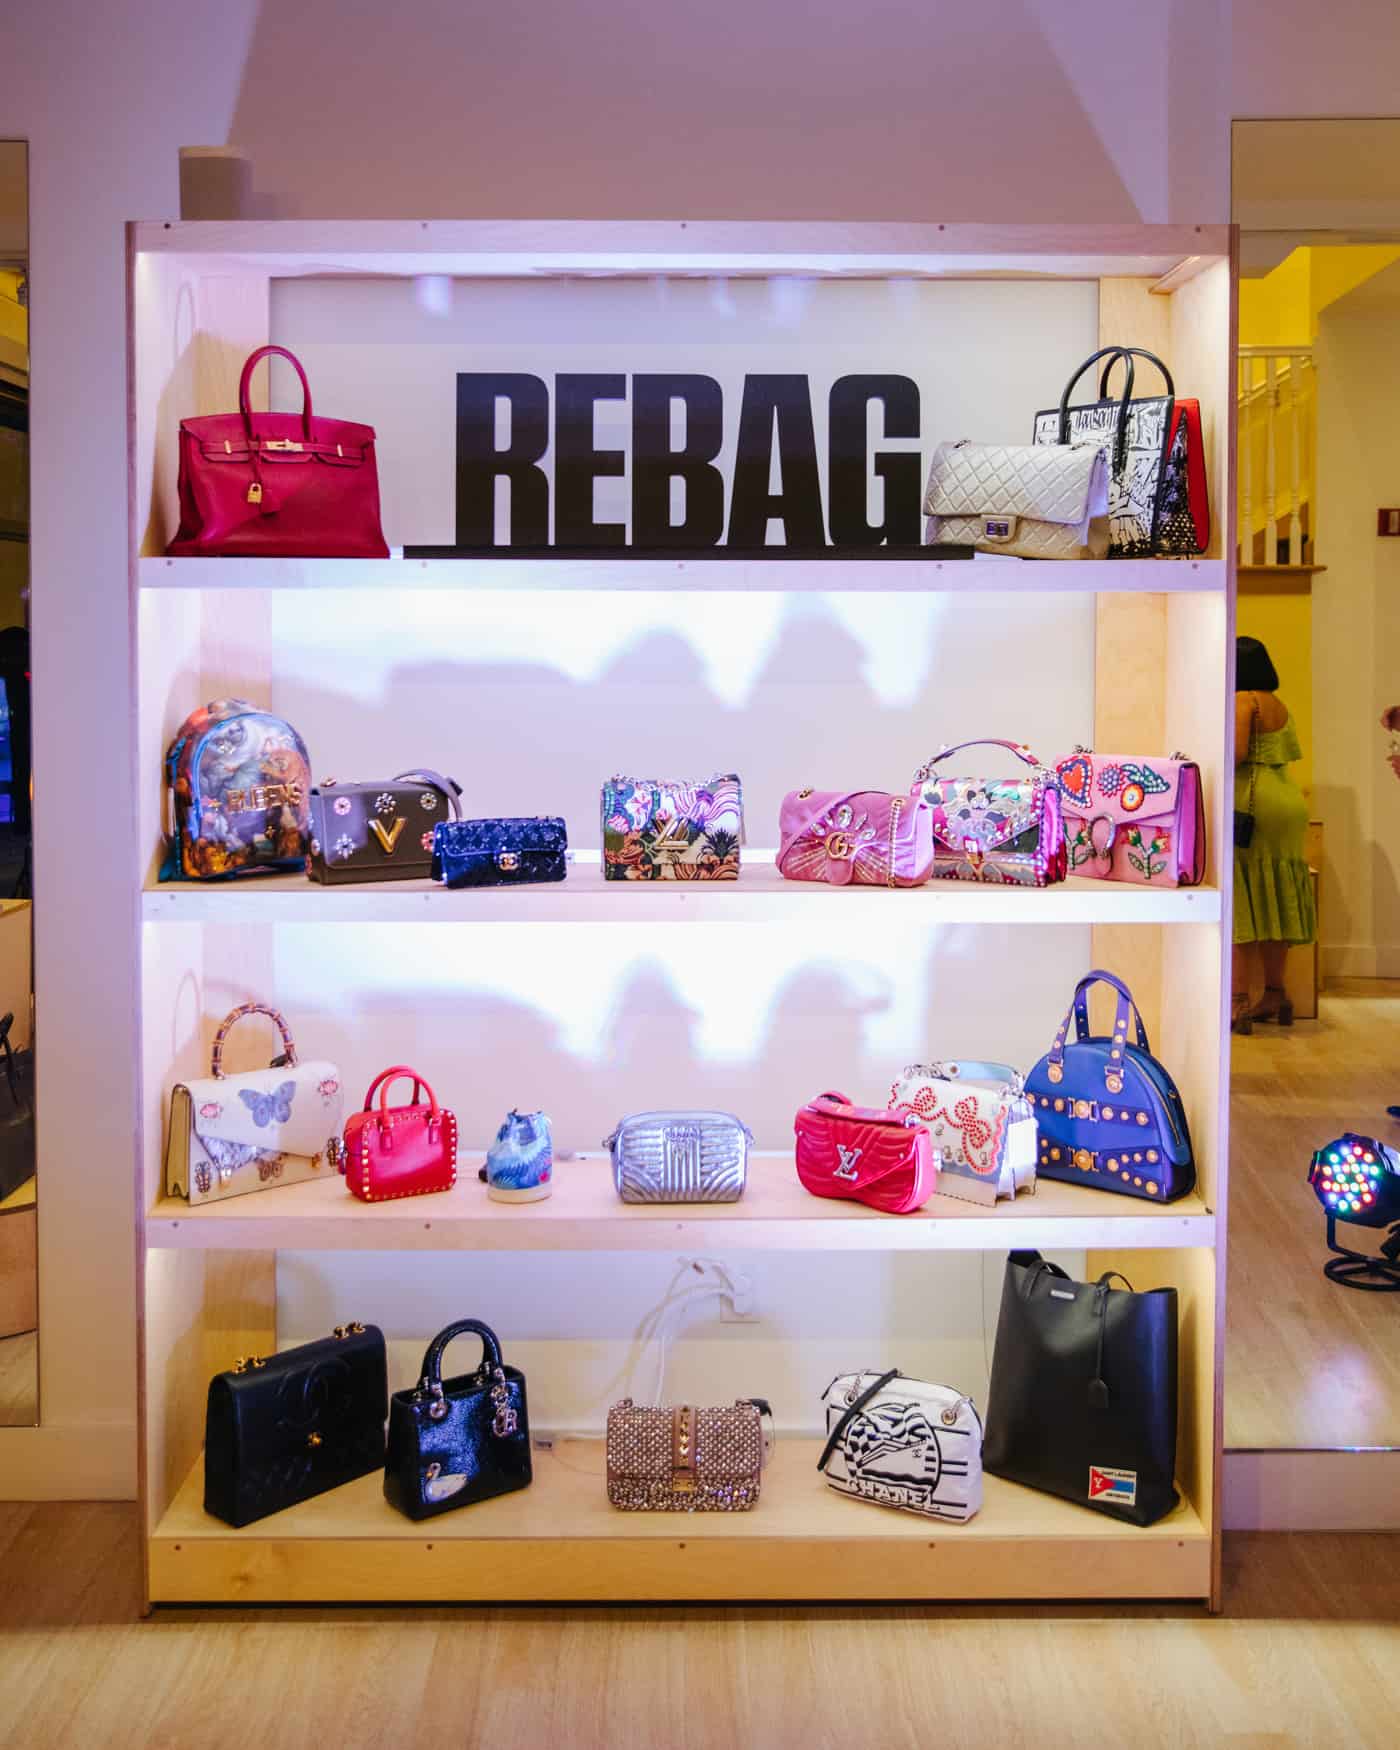 Rebag launches the Rebag Outlet